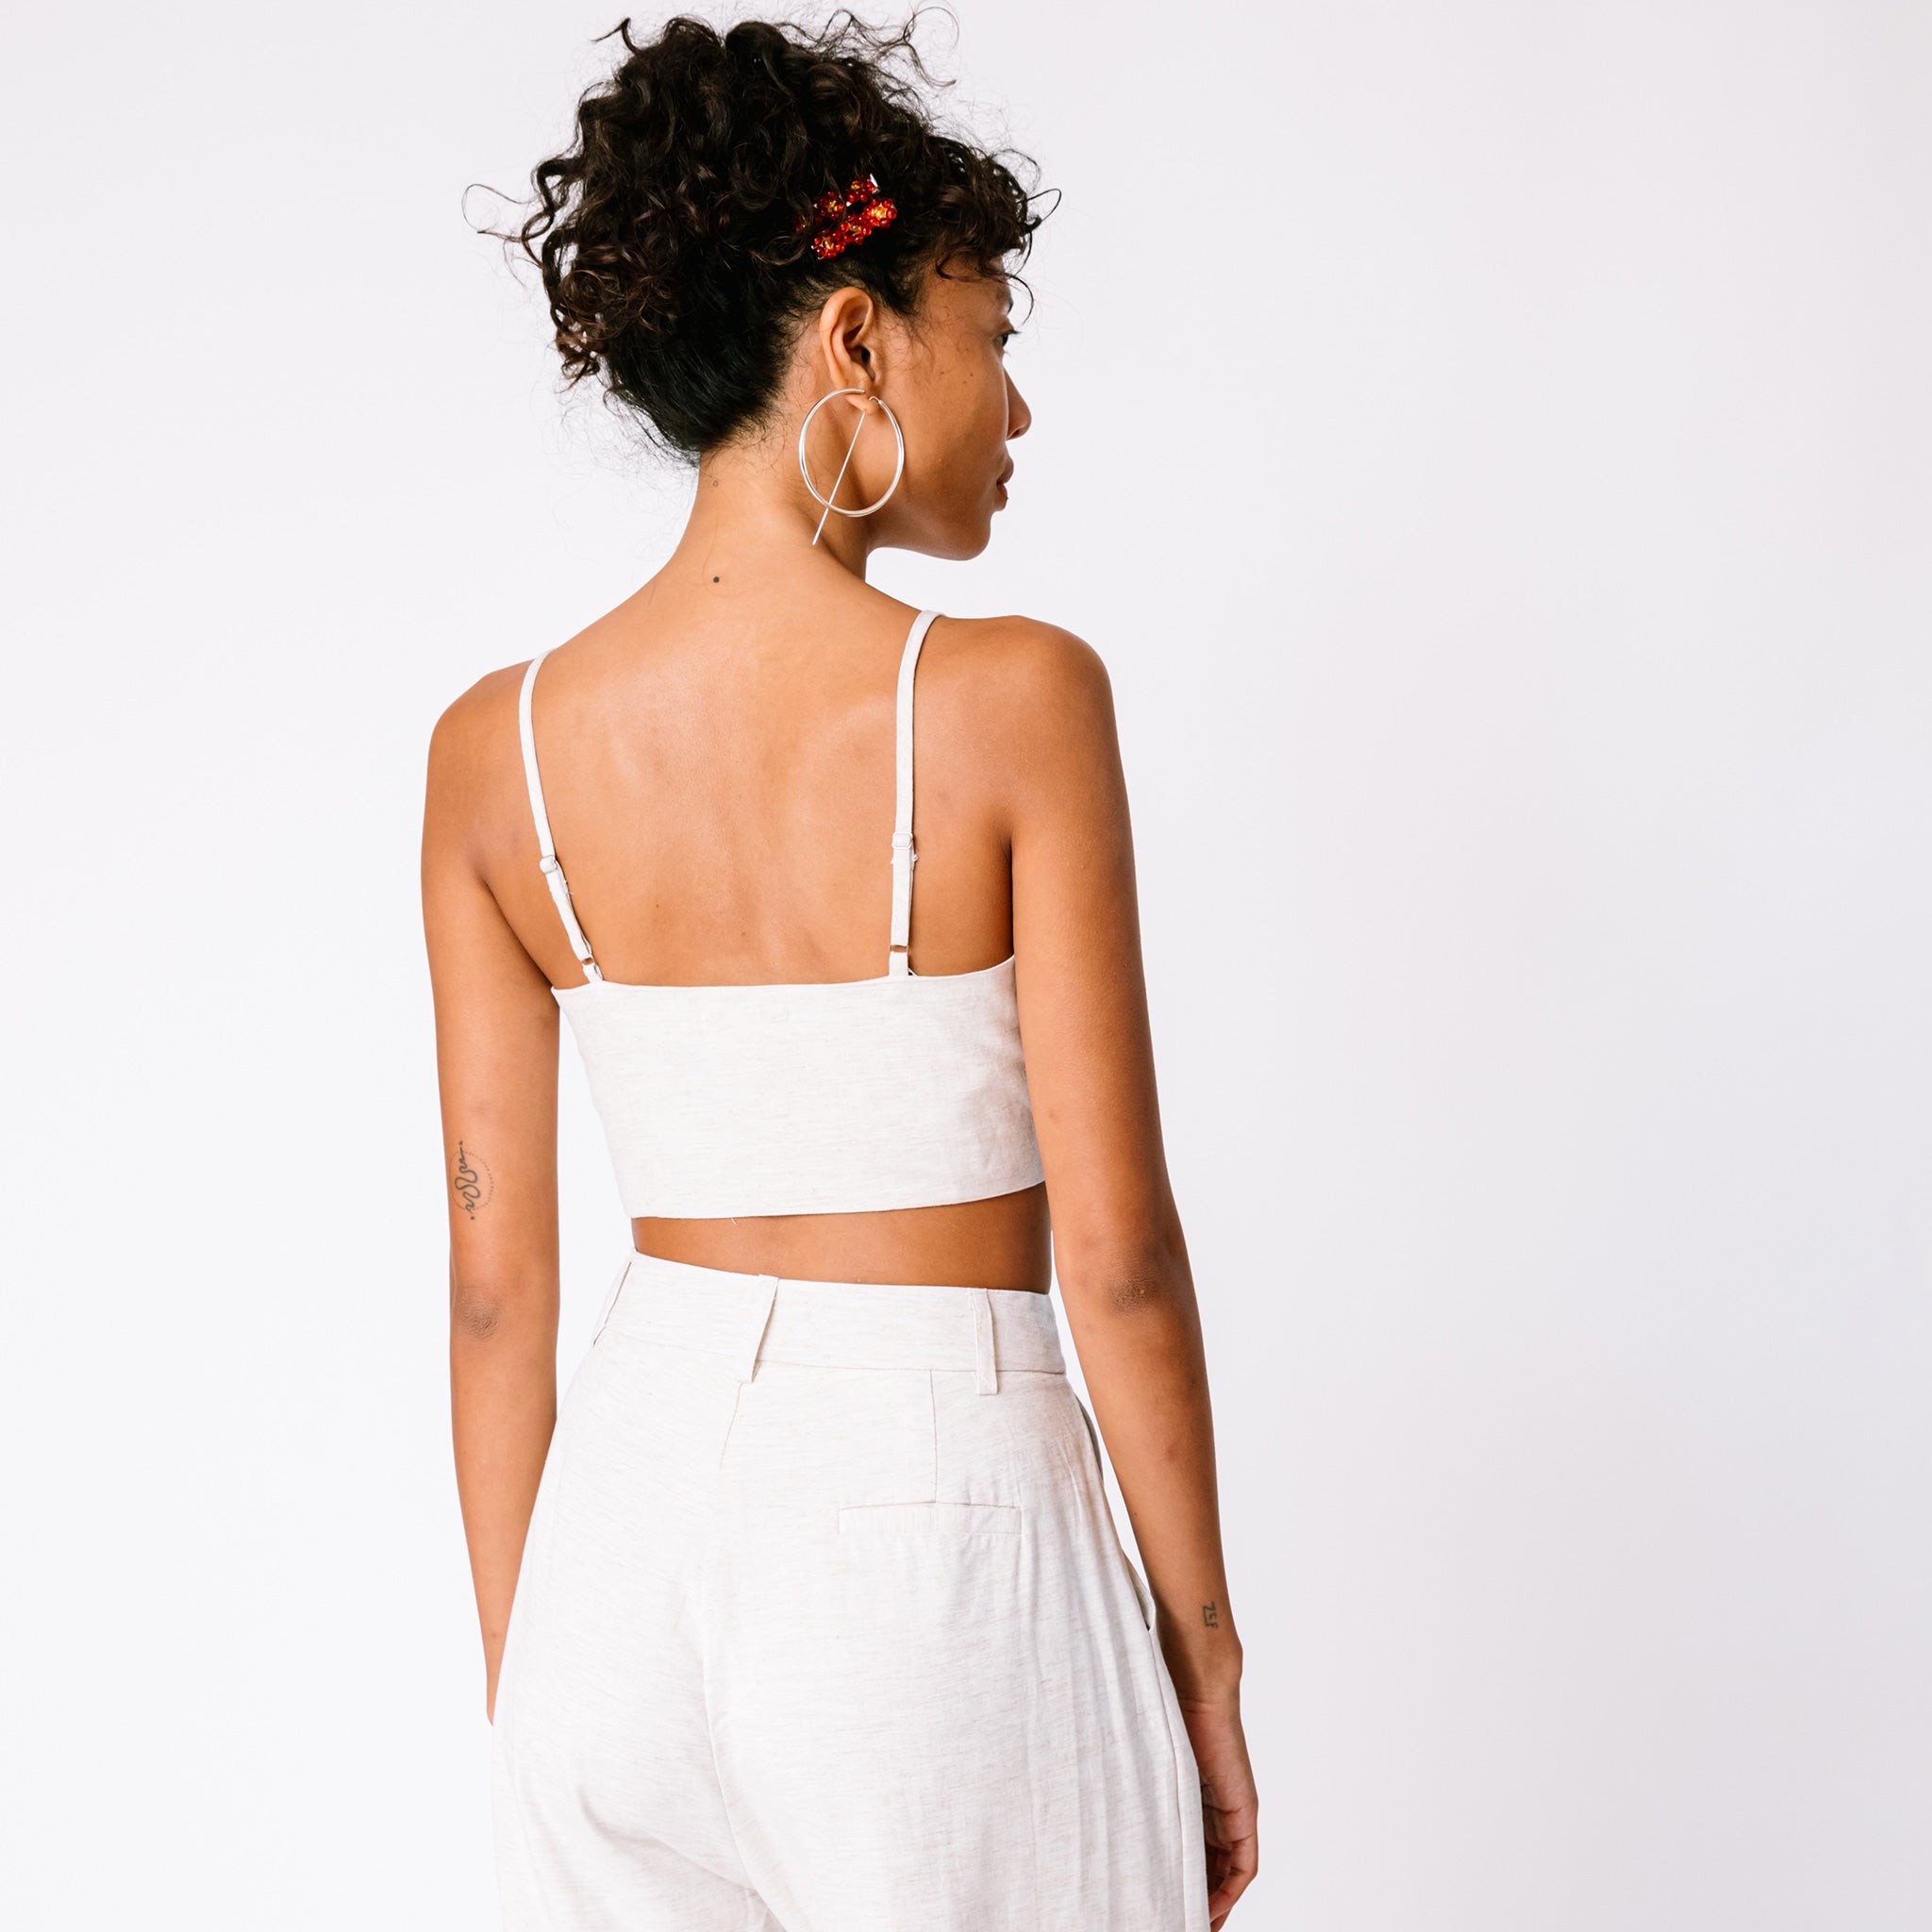 A model wears the Tie Cami Top and large silver hoop earrings, back view.